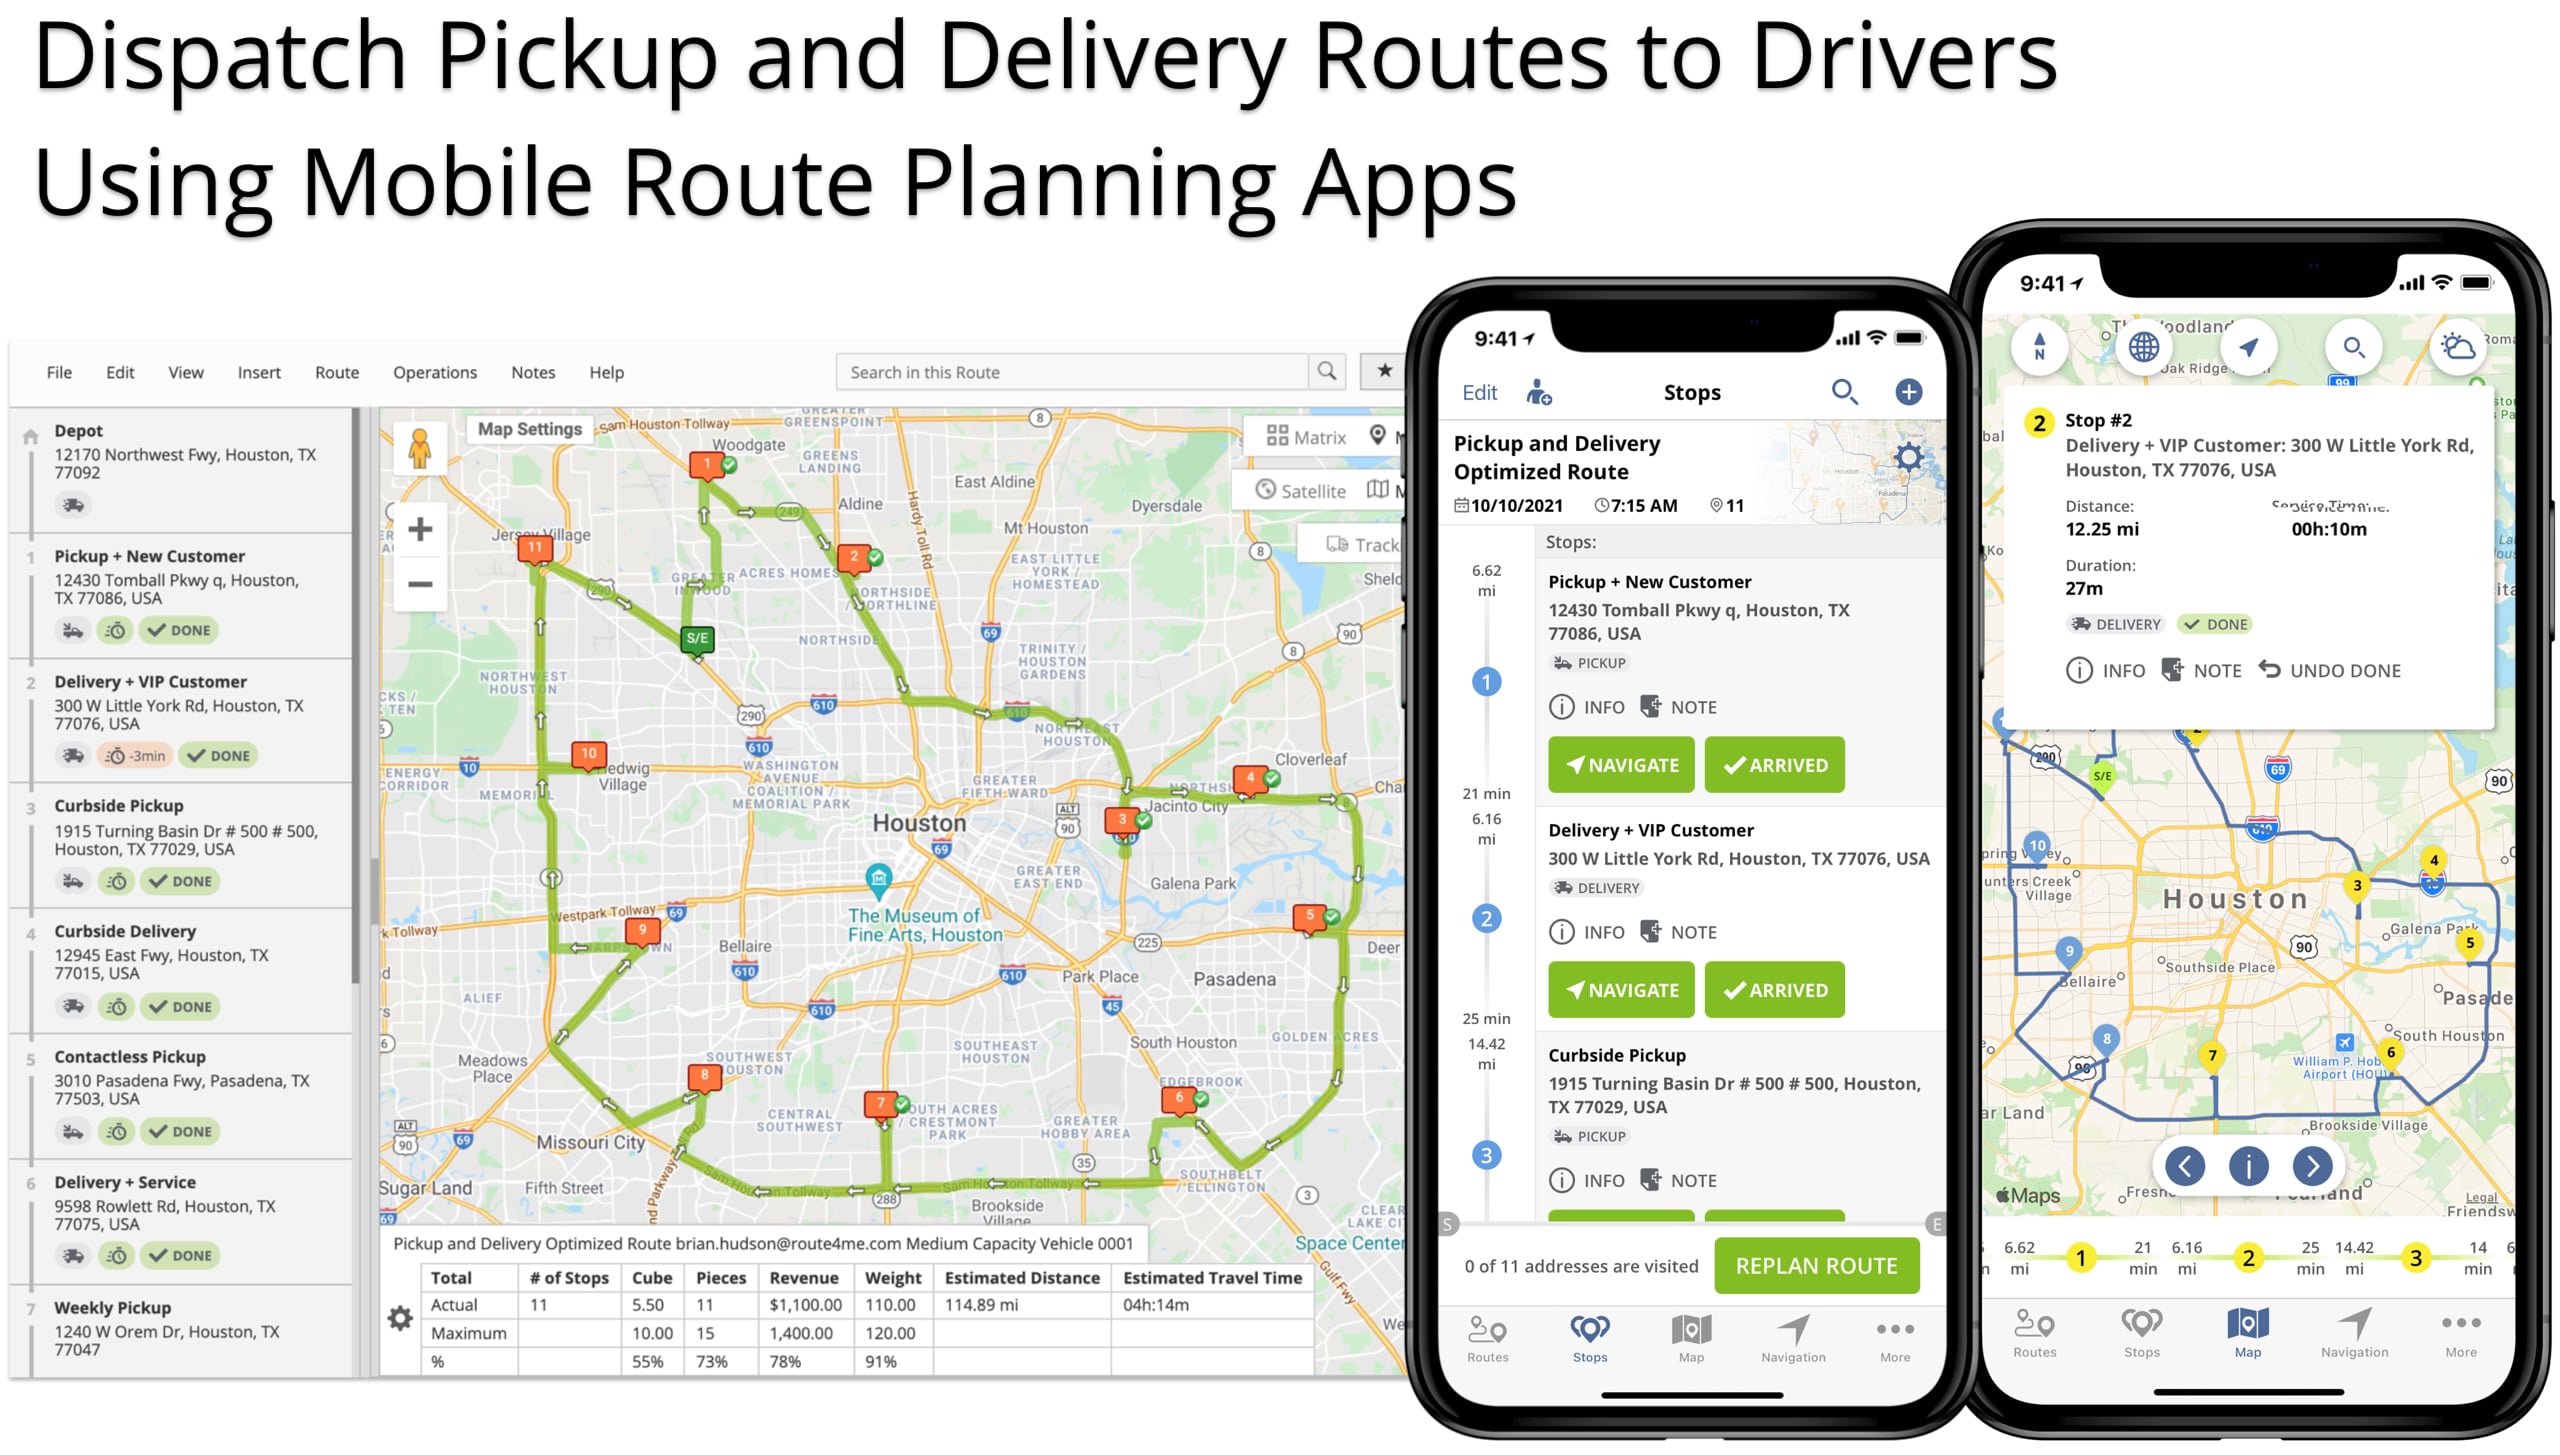 Optimize and dispatch pickup and delivery routes to drivers using mobile route planner apps.